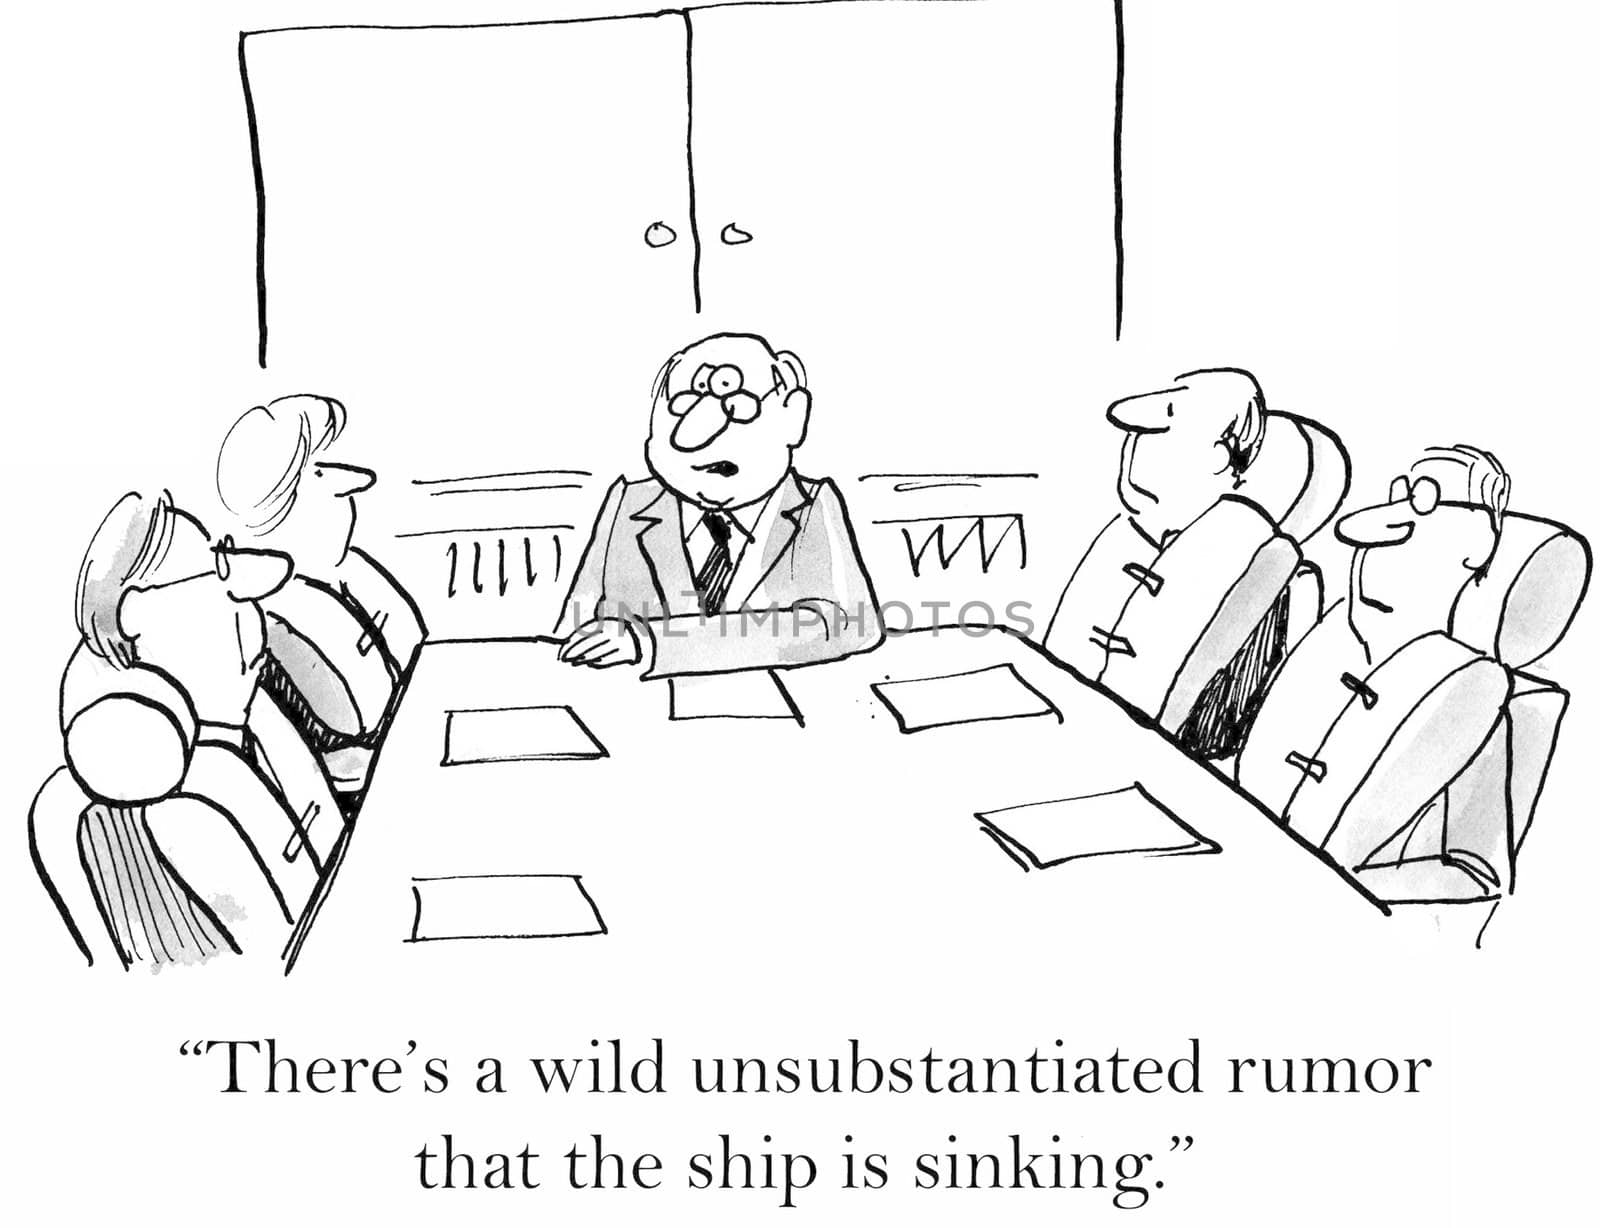 "There's a wild unsubstantiated rumor that the ship is sinking."